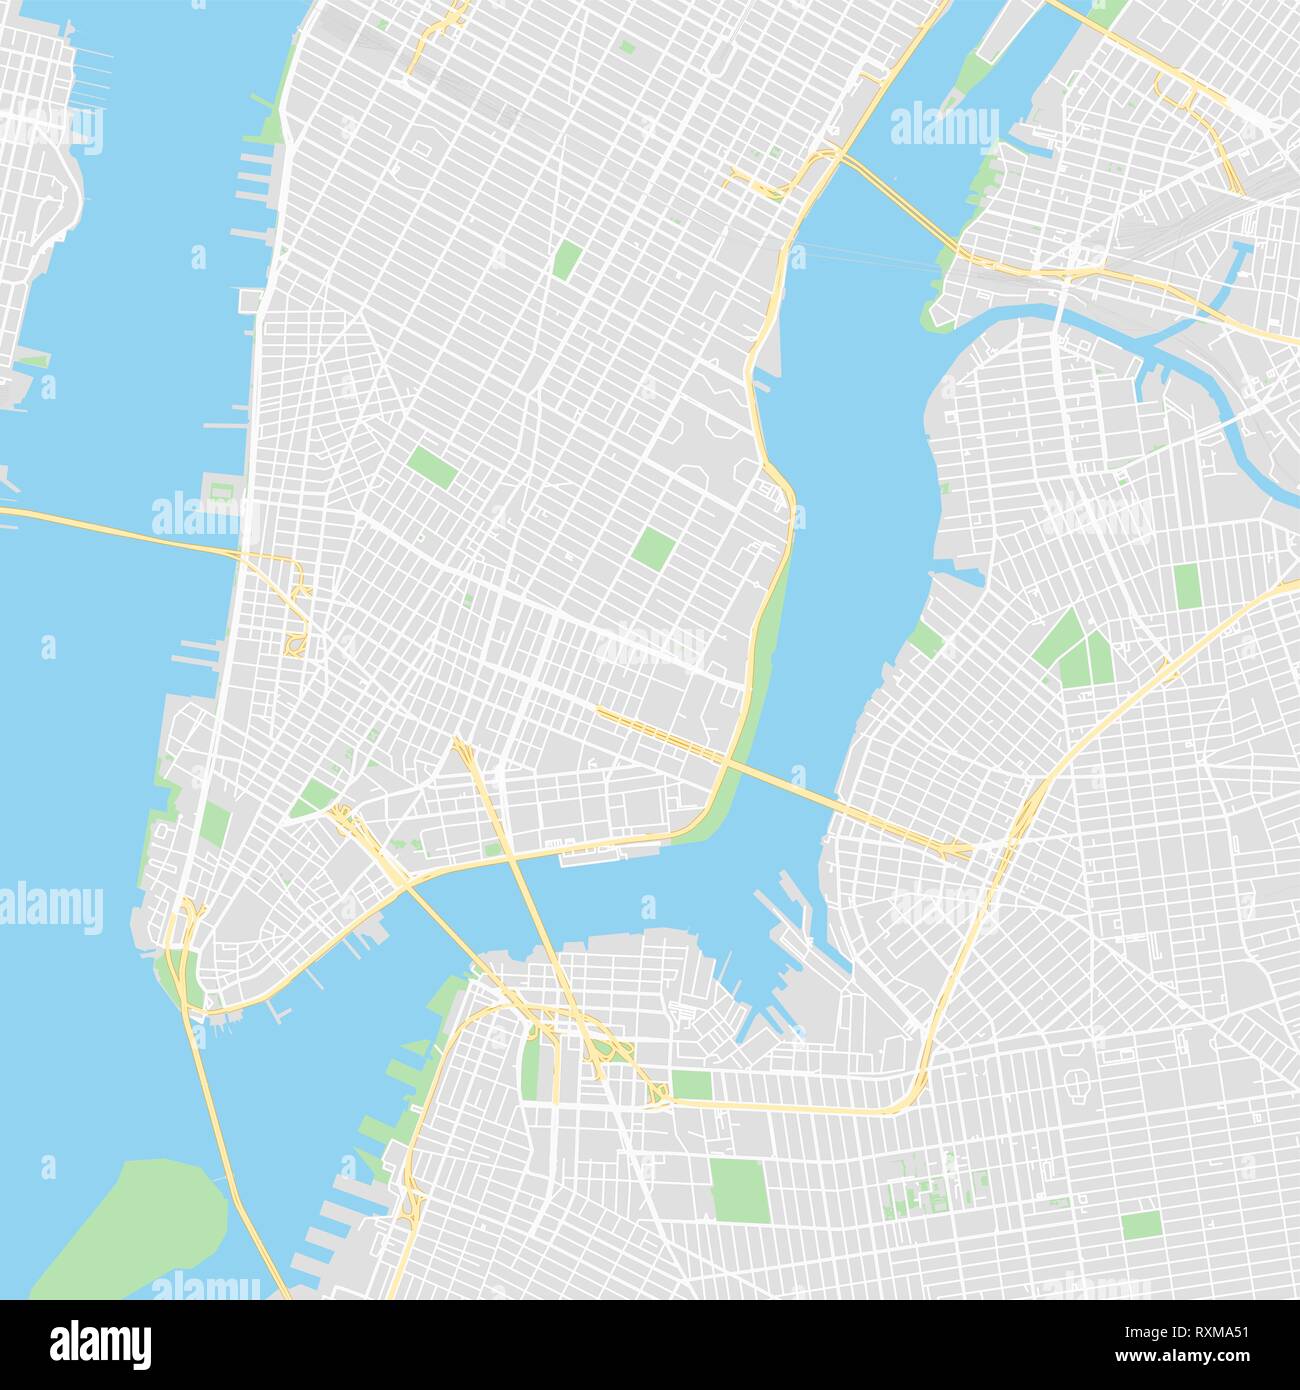 Downtown vector map of New York City, United States. This printable map of New York City contains lines and classic colored shapes for land mass, park Stock Vector